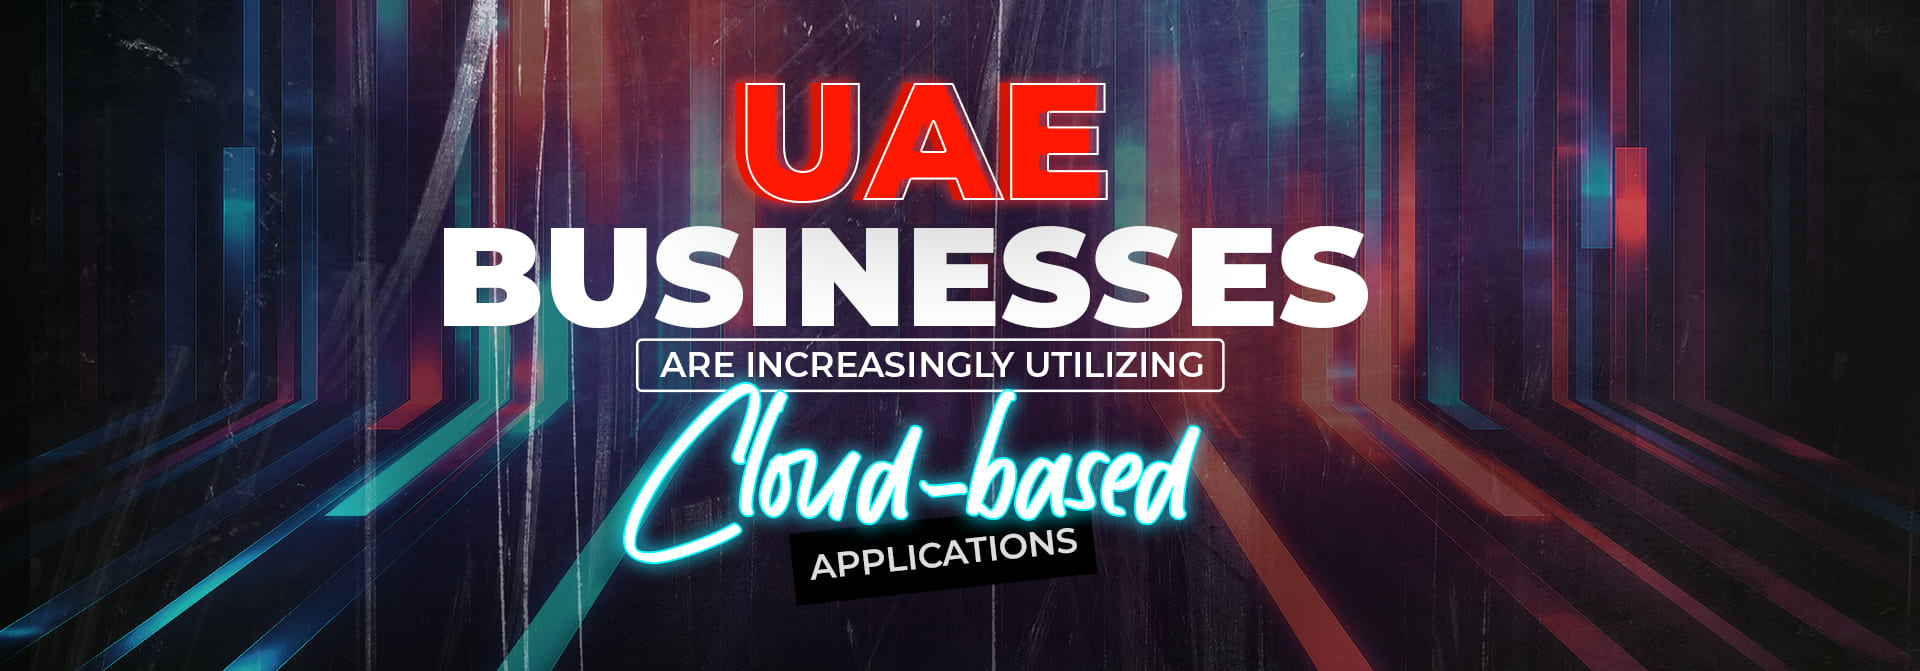 PAC_UAE businesses_Banner